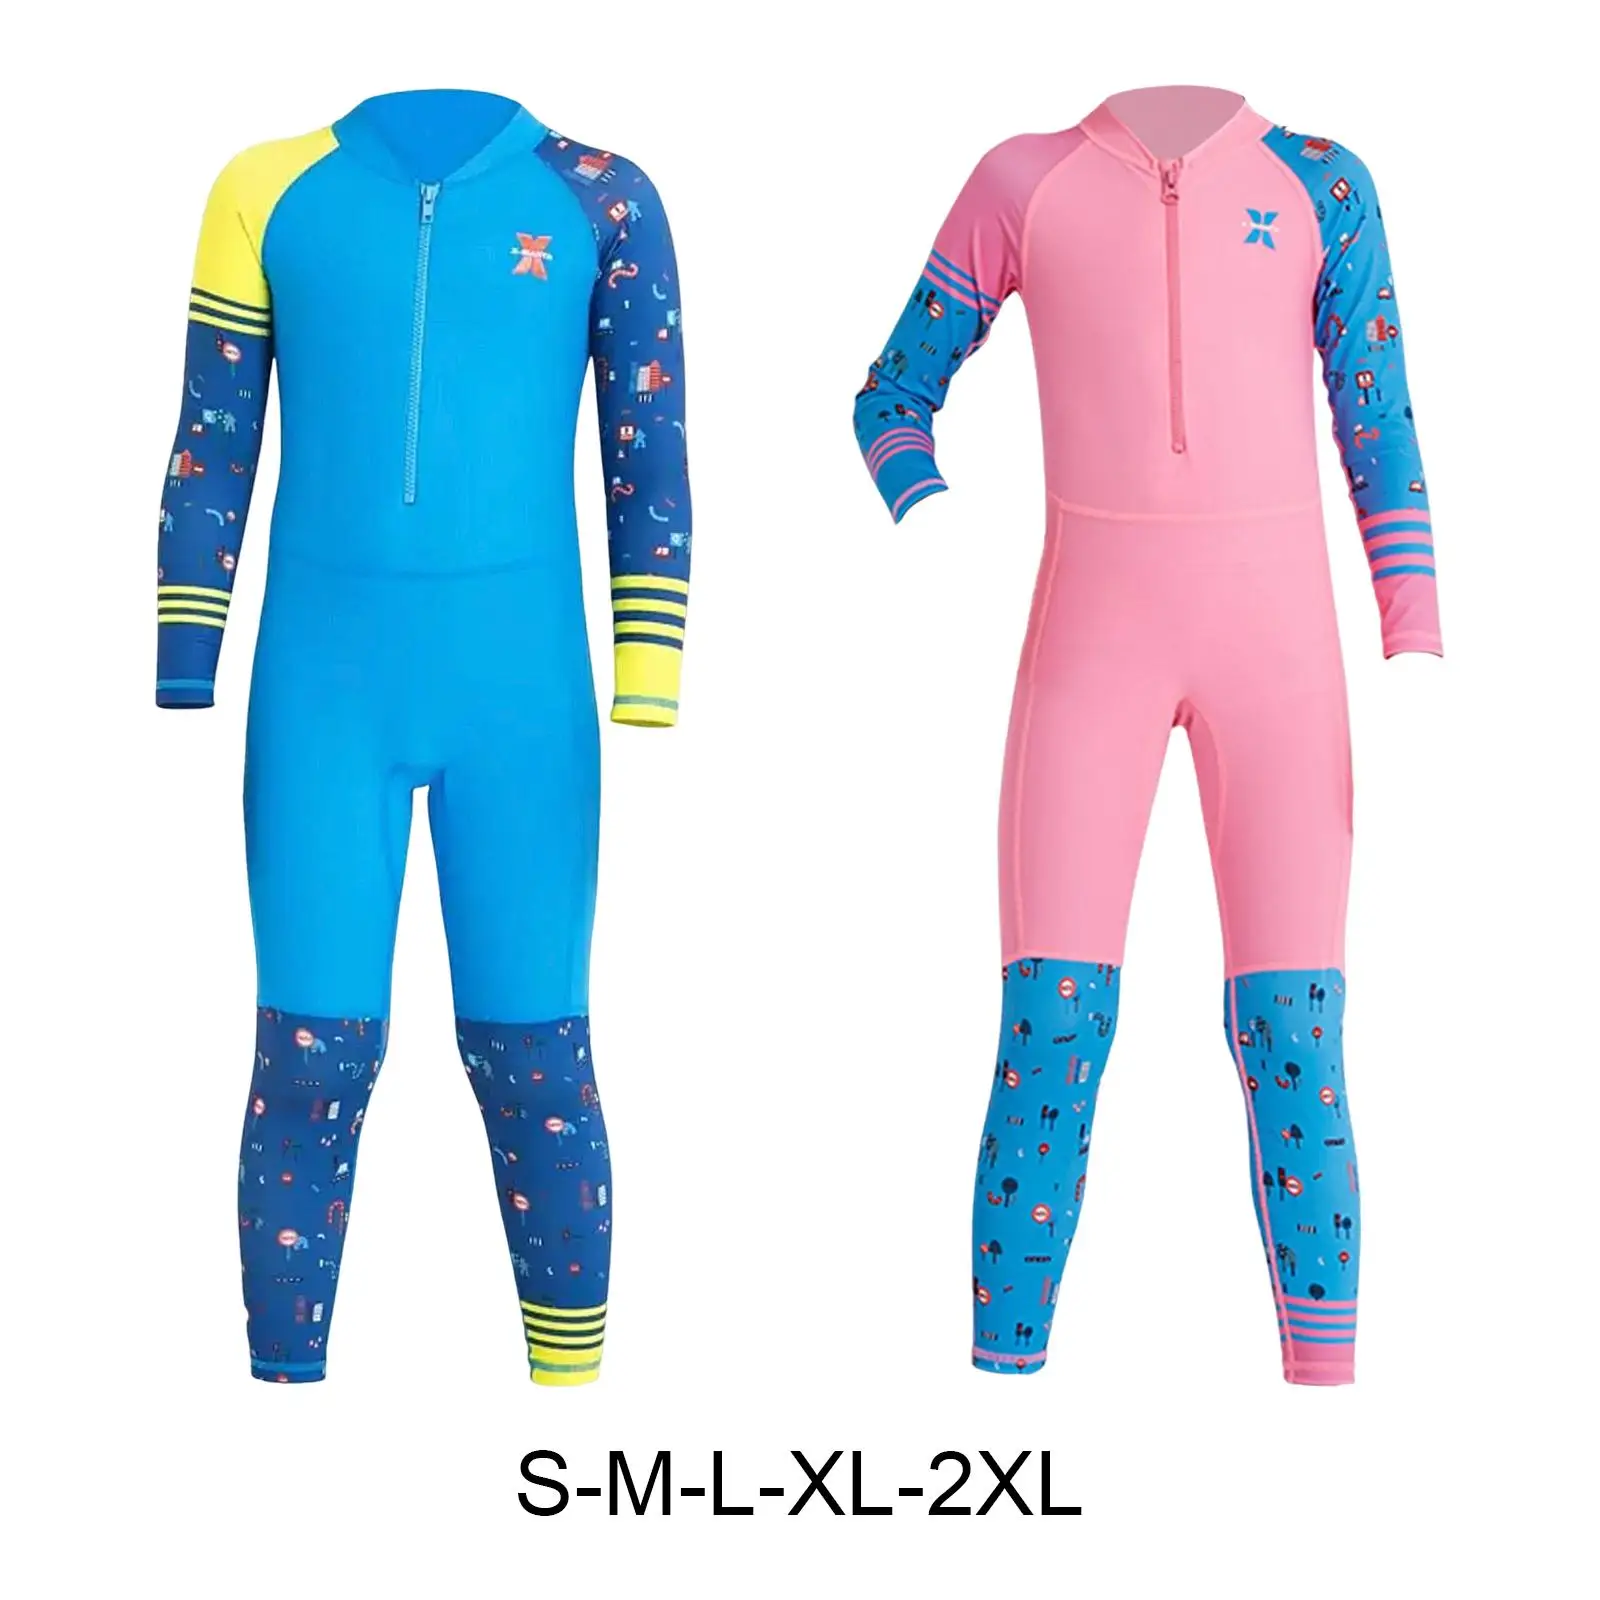 

Kids Wetsuit Diving Swimsuits Quick Drying Waterproof Surfing Thermal Fullsuit for Scuba Snorkeling Water Aerobics Toddler Youth